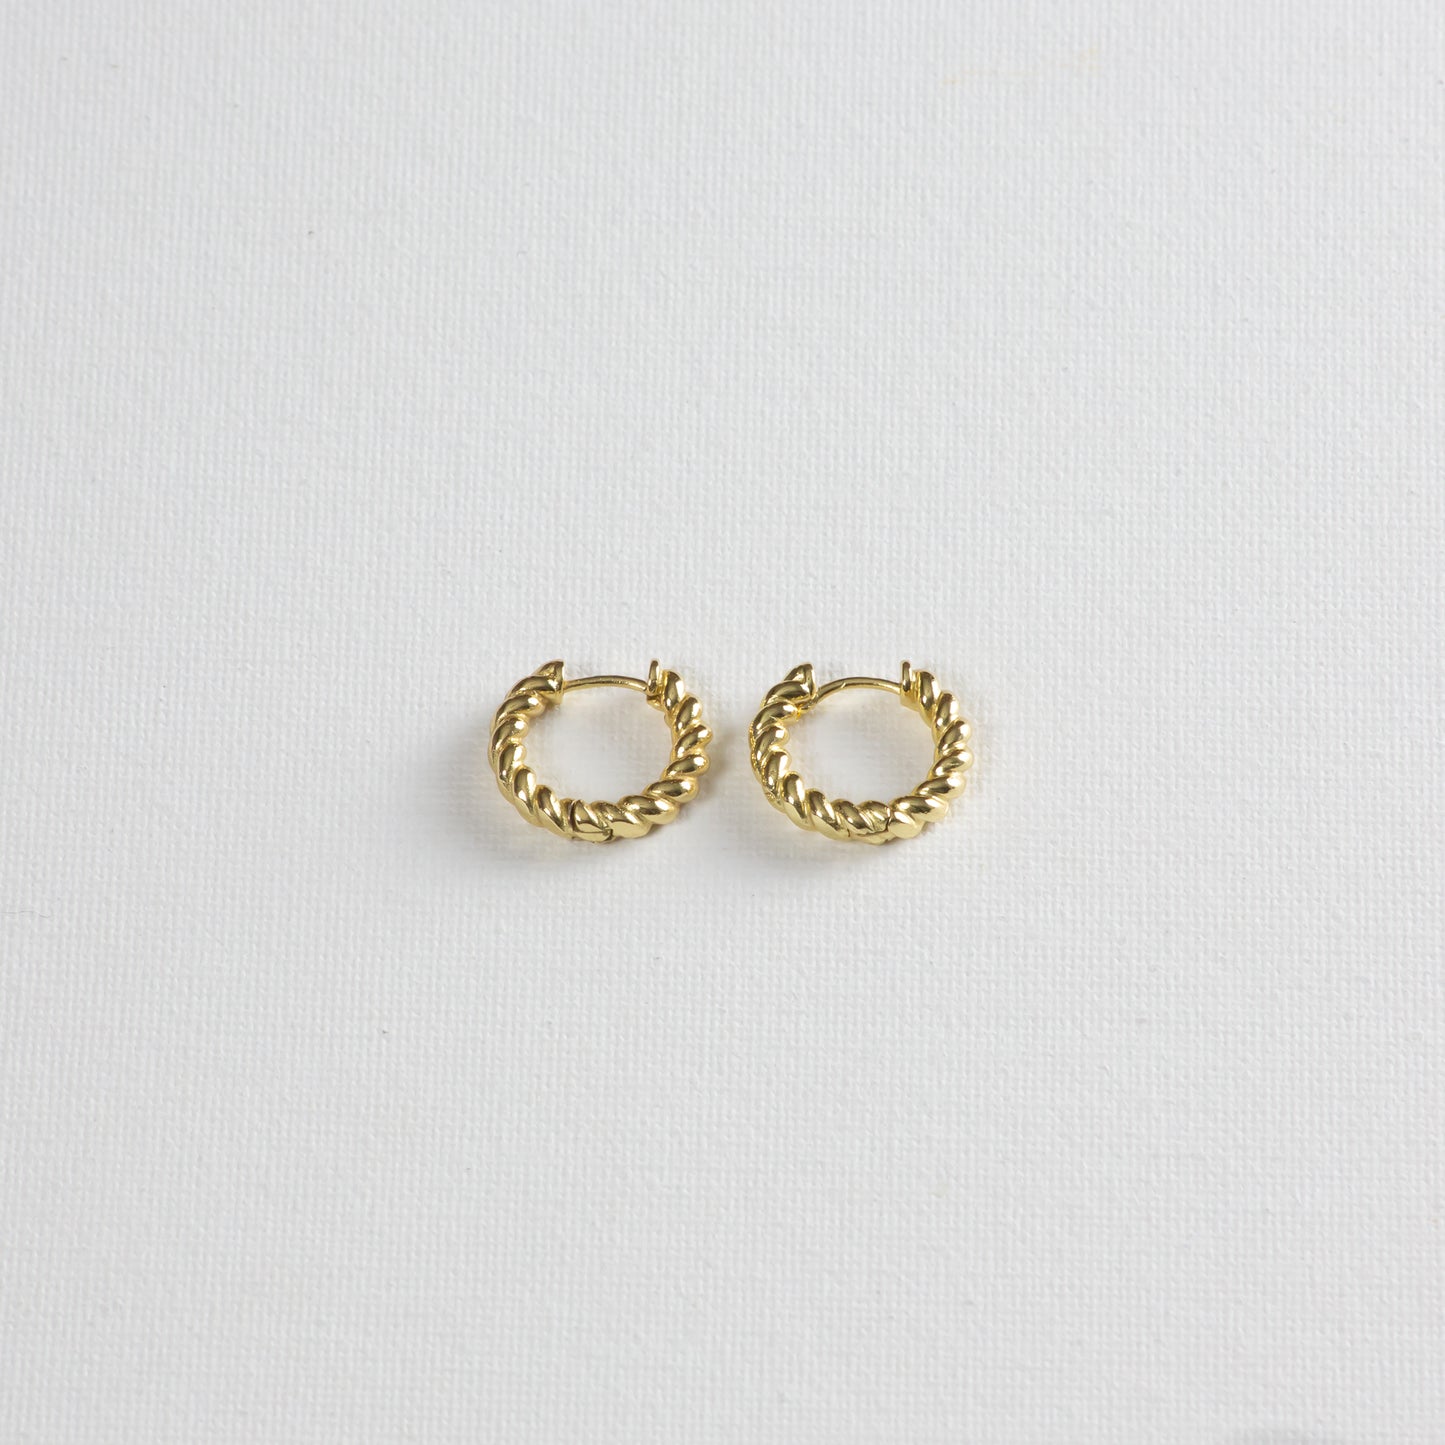 Honey Crueller Hoop Earrings, a gold hoop earrings with twist detail, showcased on a white background, photographed from a slight angle at the bottom.